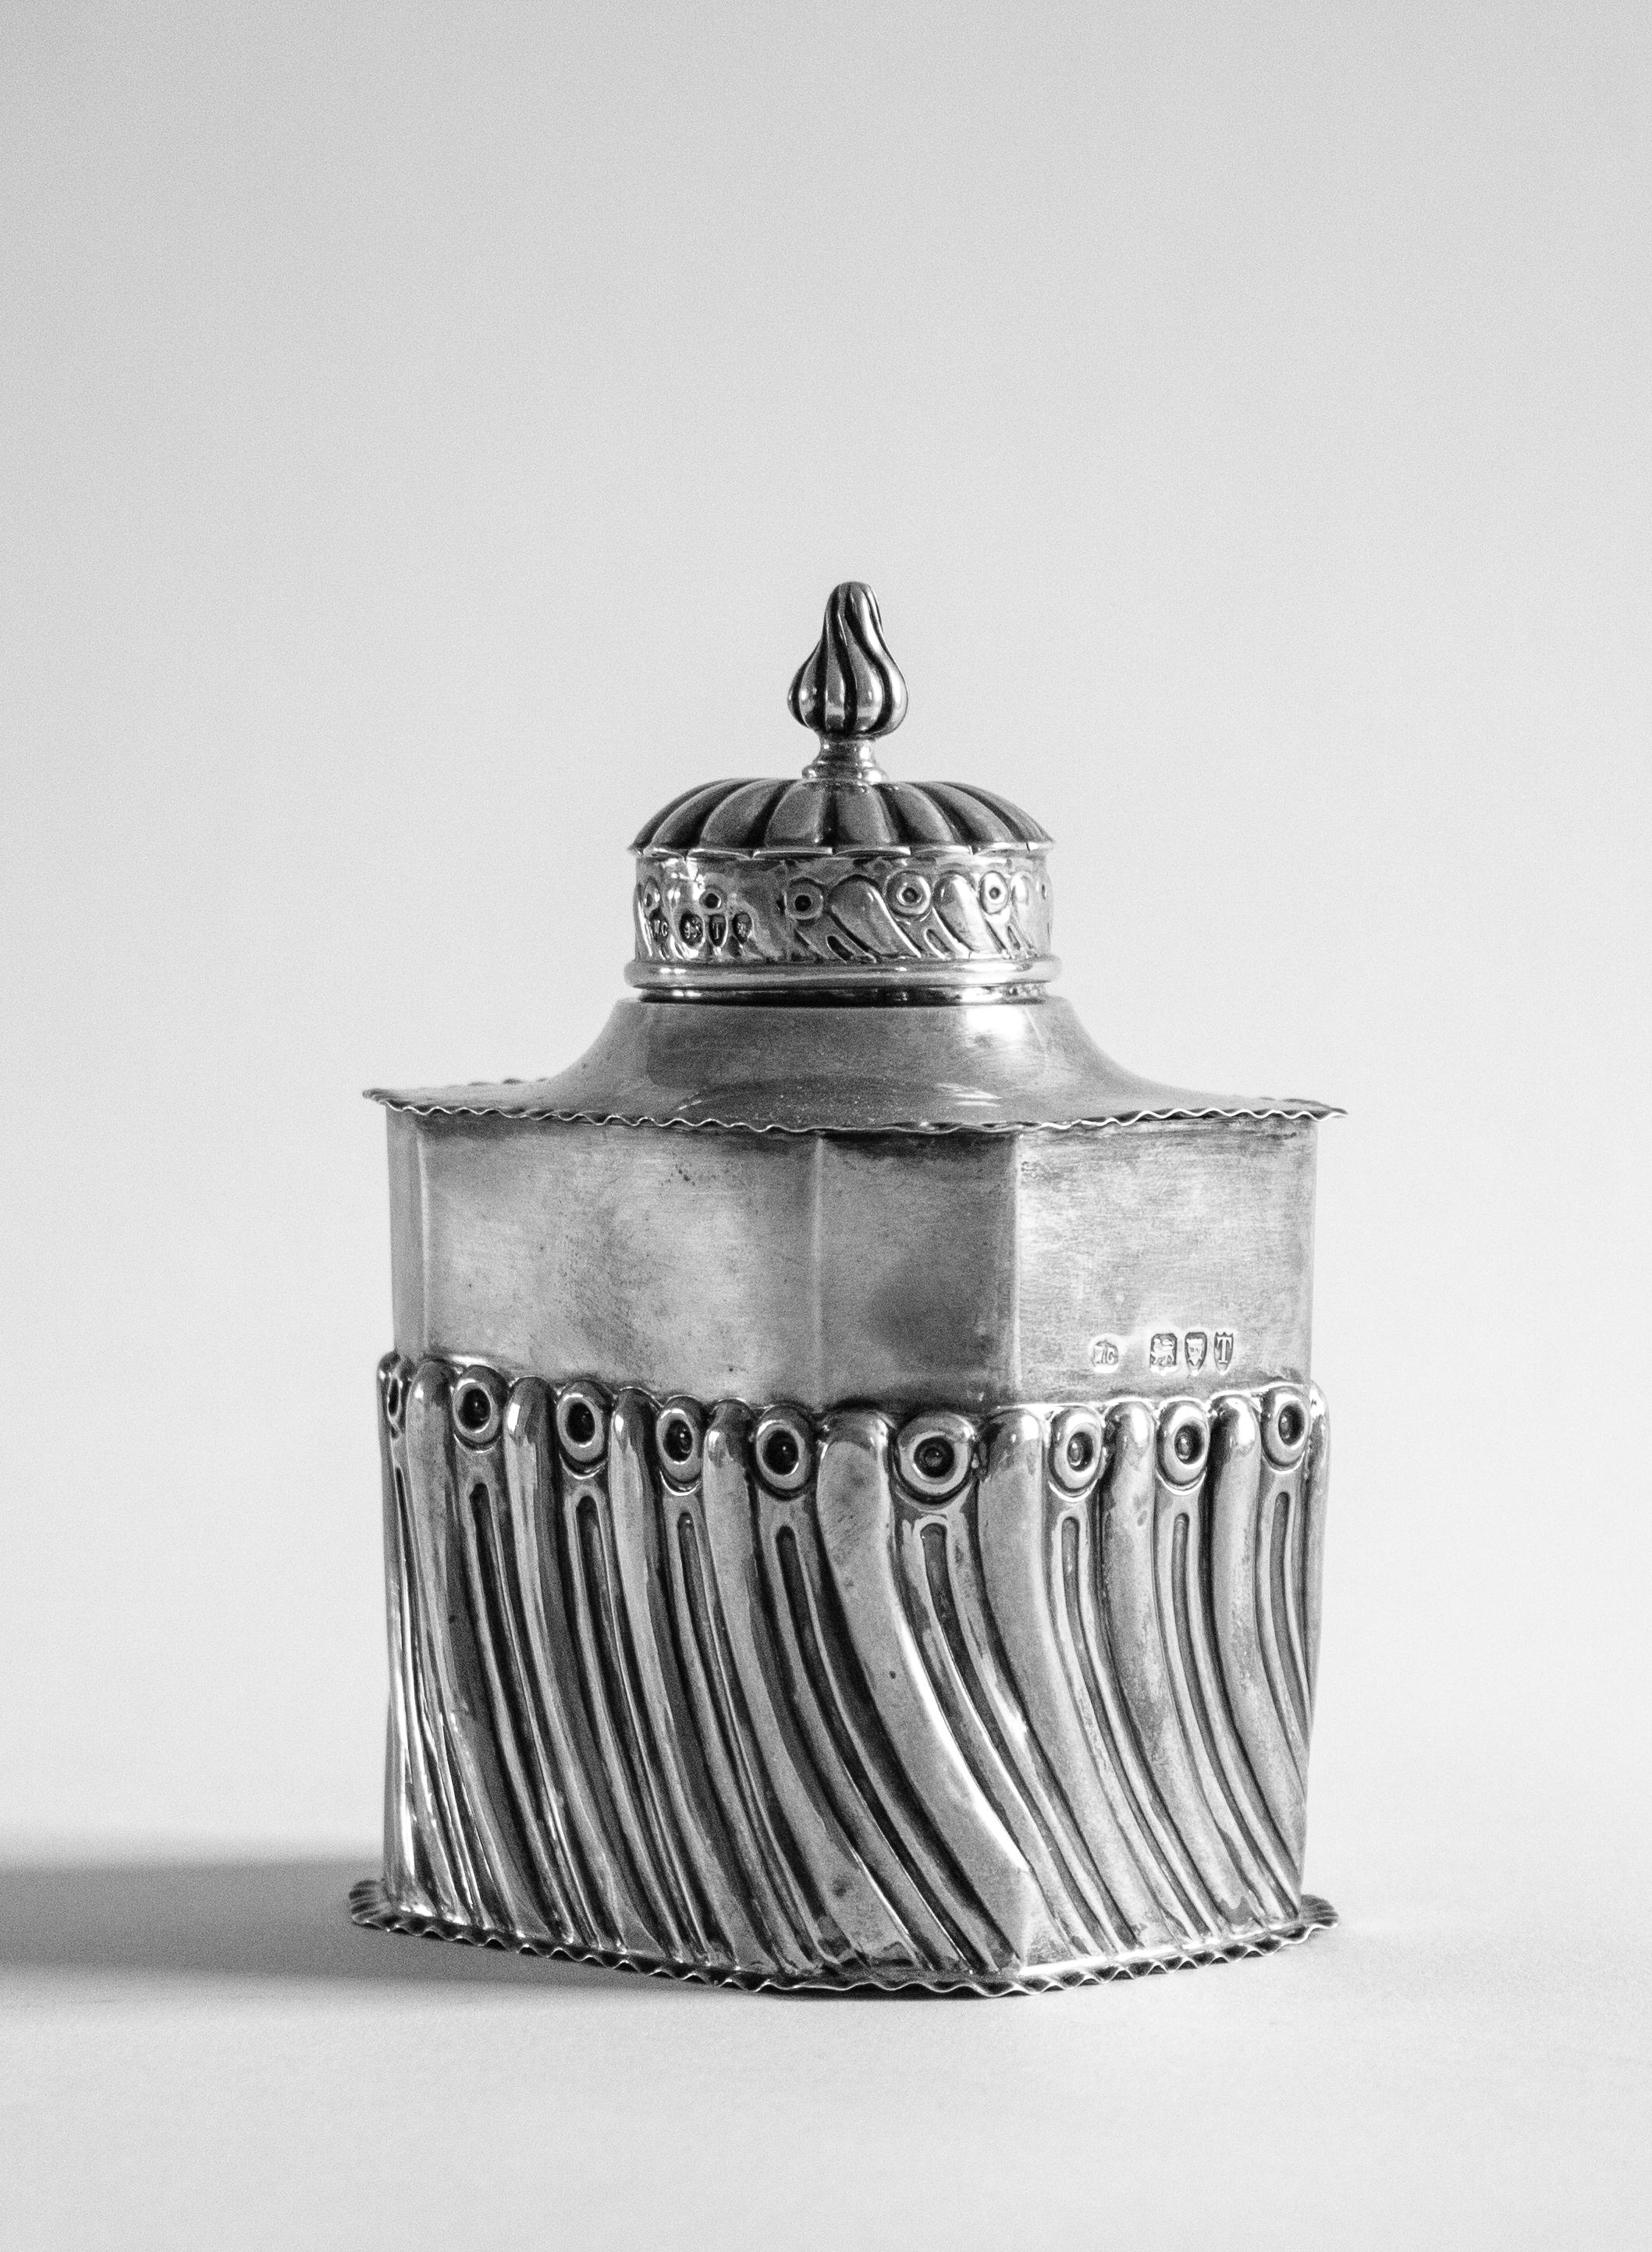 Embossed English Tea Caddy in Sterling Silver, dated 1894, William Richard Corke, London For Sale